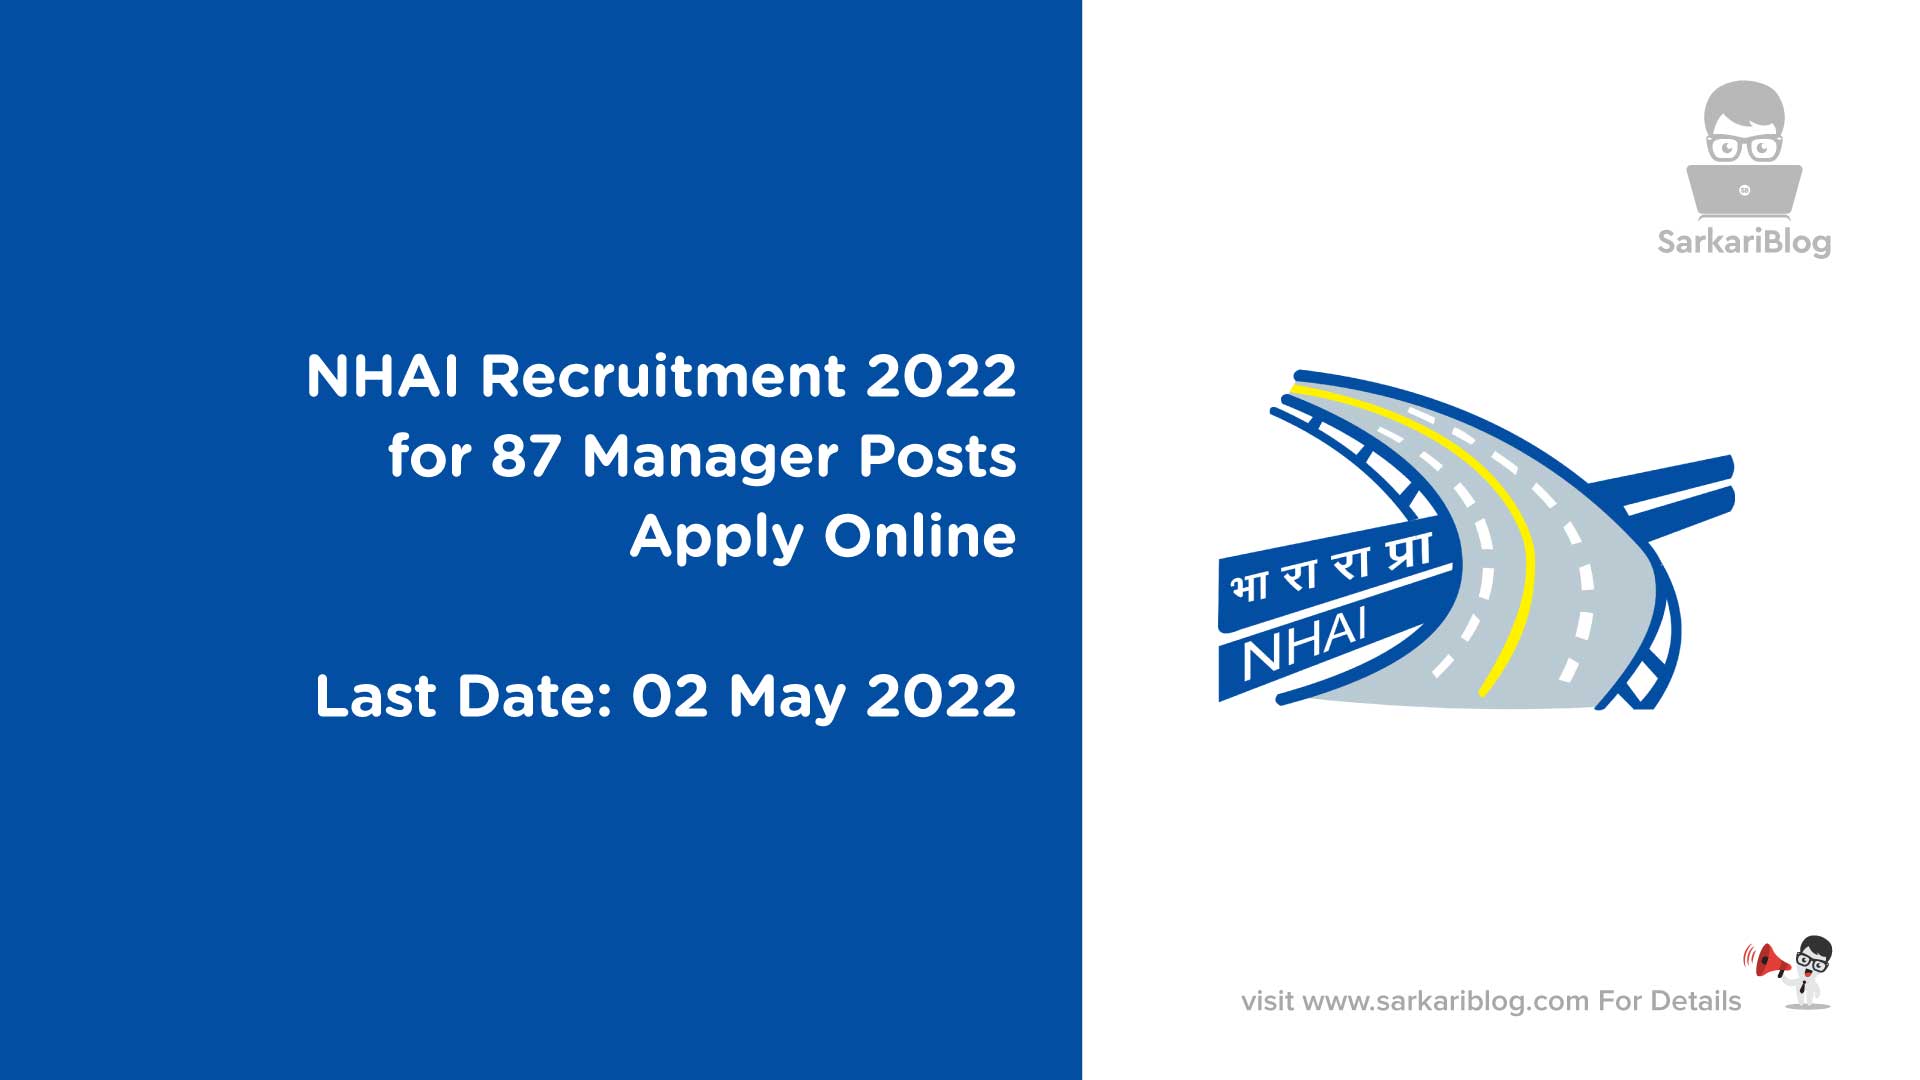 NHAI Recruitment 2022 – for 87 Manager Posts Apply Online